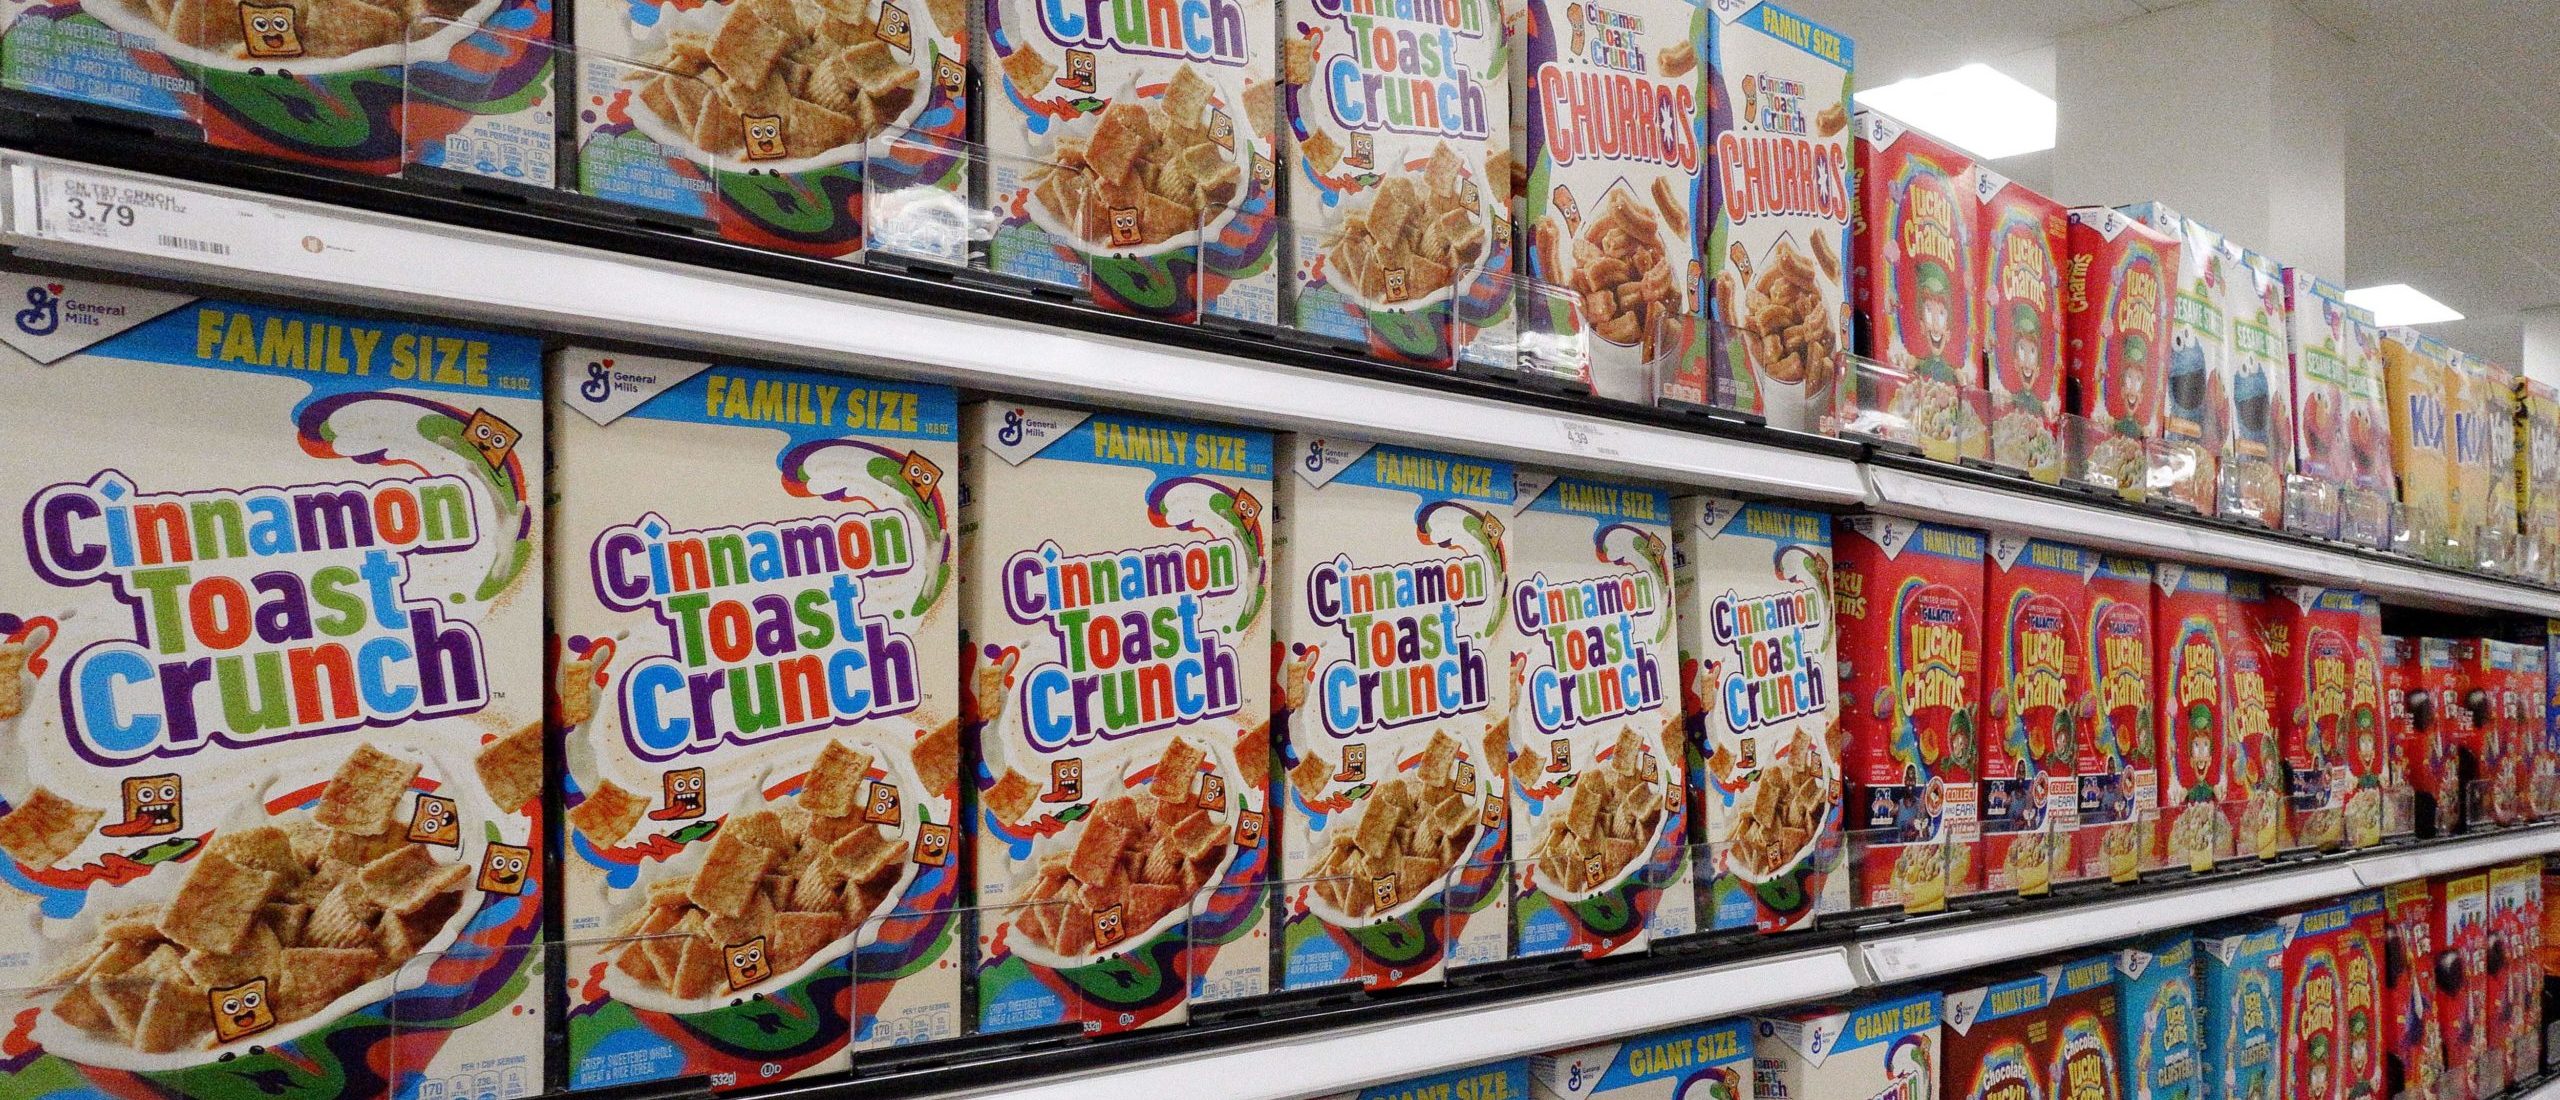 General Mills' Cinnamon Toast Crunch 18.8-ounce boxes are on display on a supermarket shelf on October 15, 2021, in Arlington, Virginia. (Photo by OLIVIER DOULIERY/AFP via Getty Images)